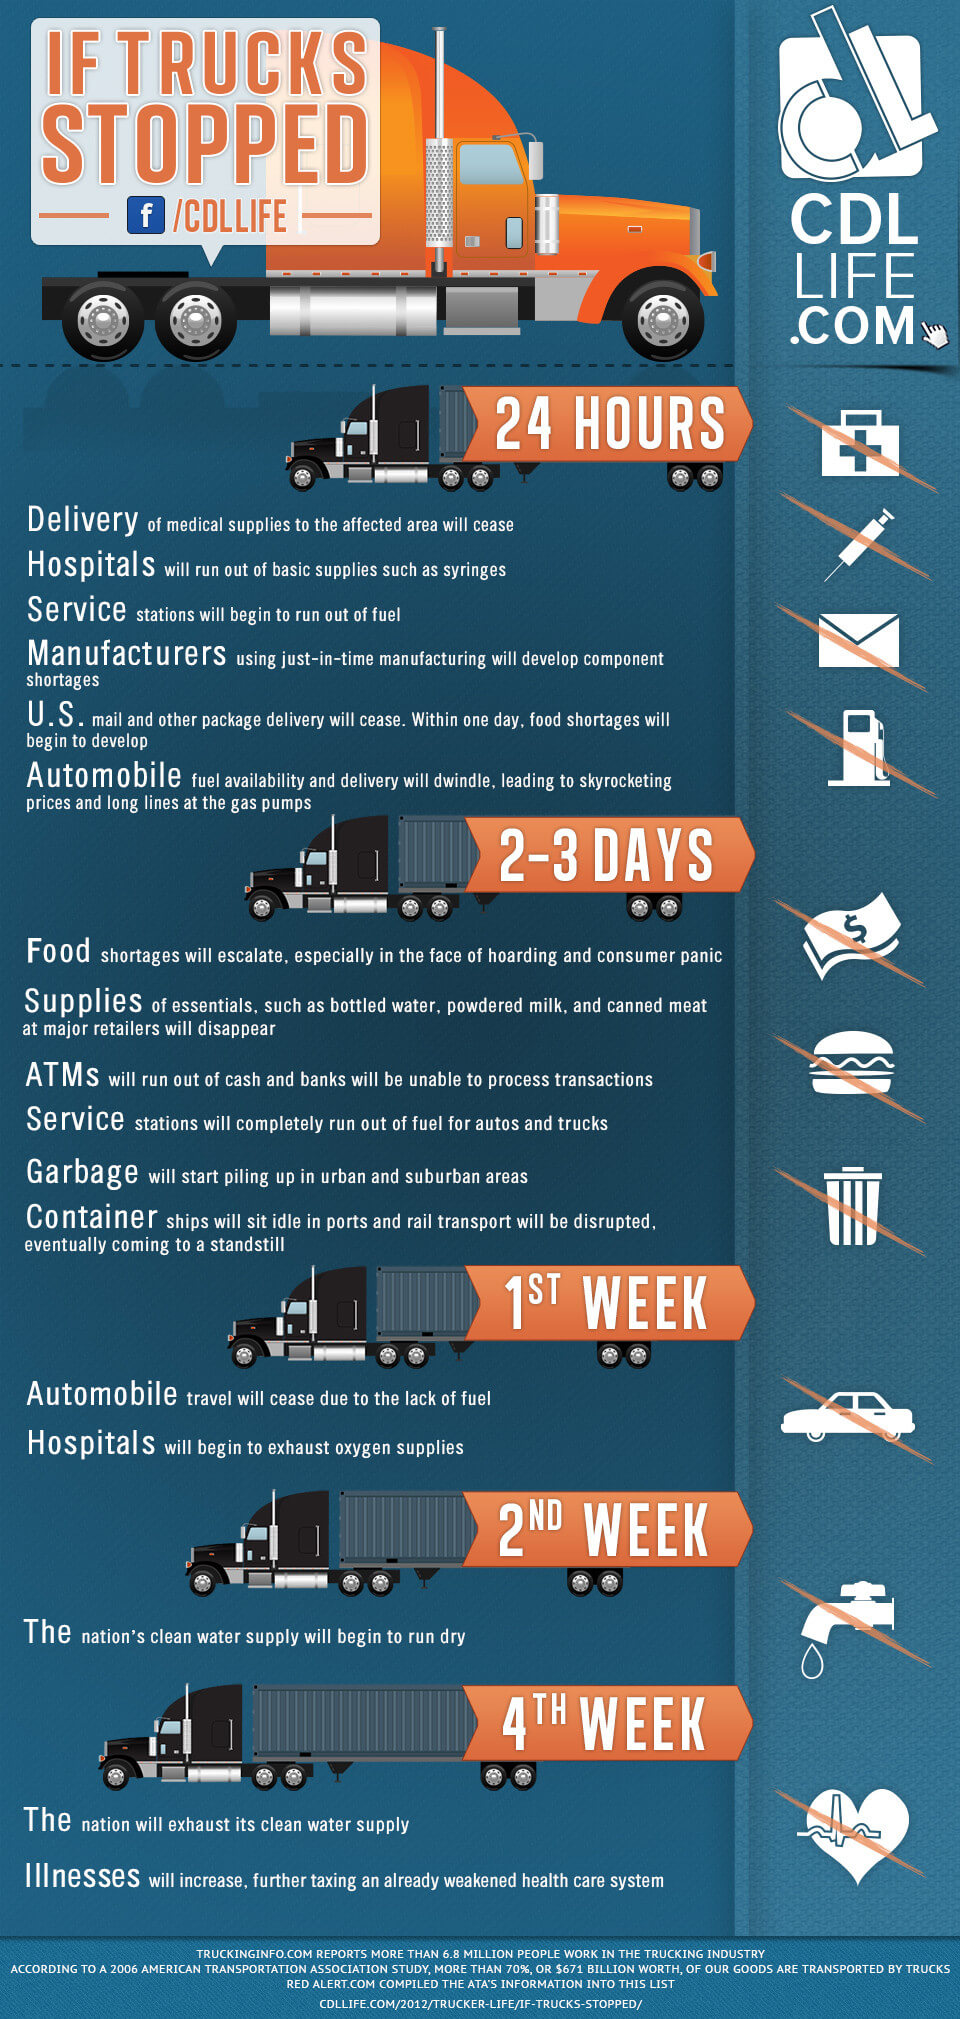 http://cdllife.com/wp-content/uploads/2012/06/If_Trucks_Stopped_Infographic_CDL_Life1.jpg